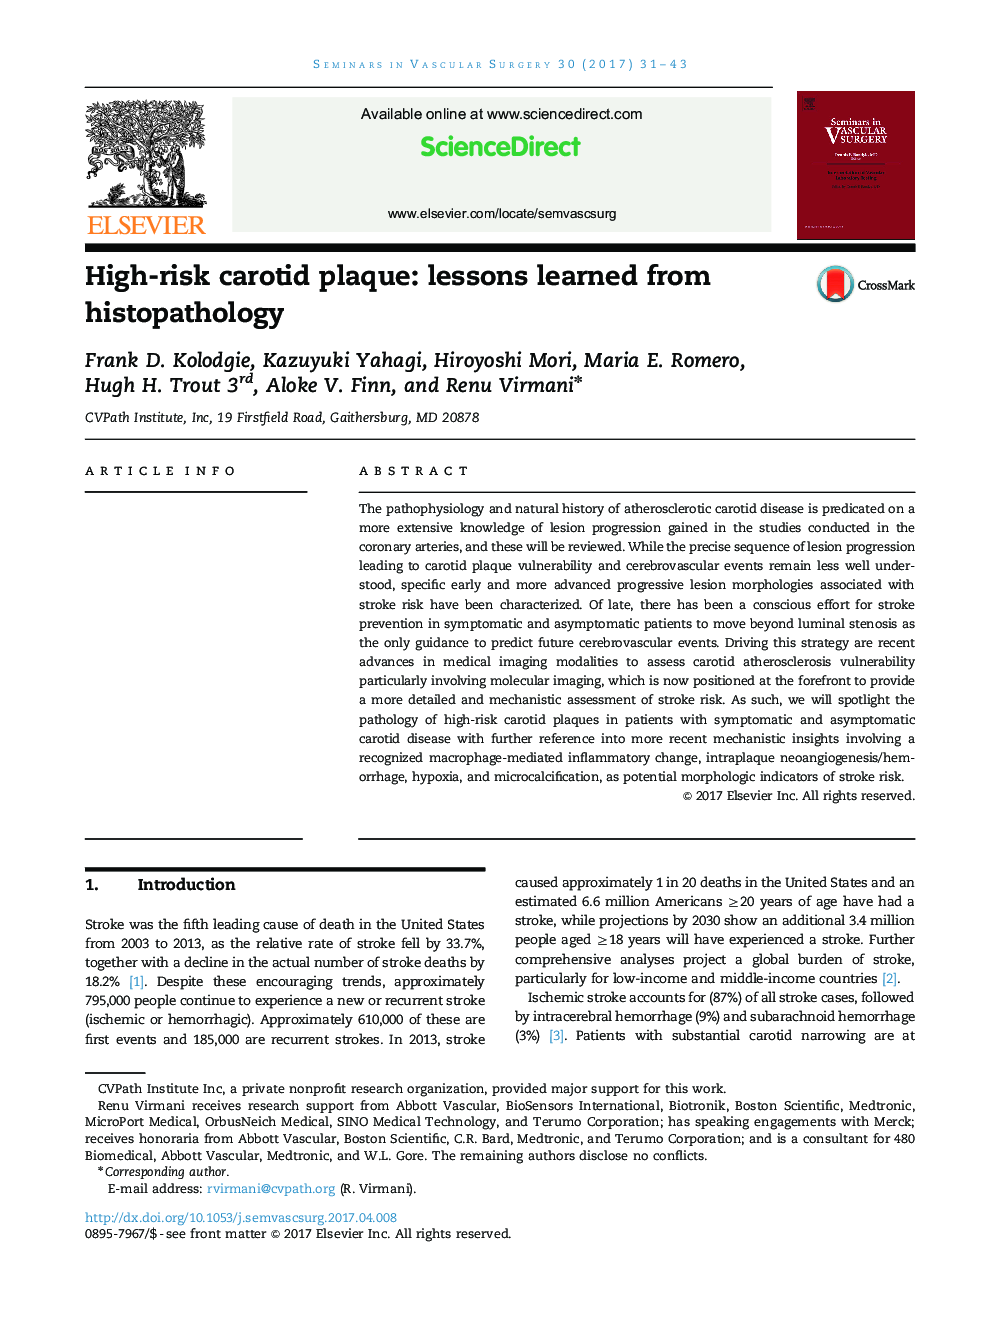 High-risk carotid plaque: lessons learned from histopathology